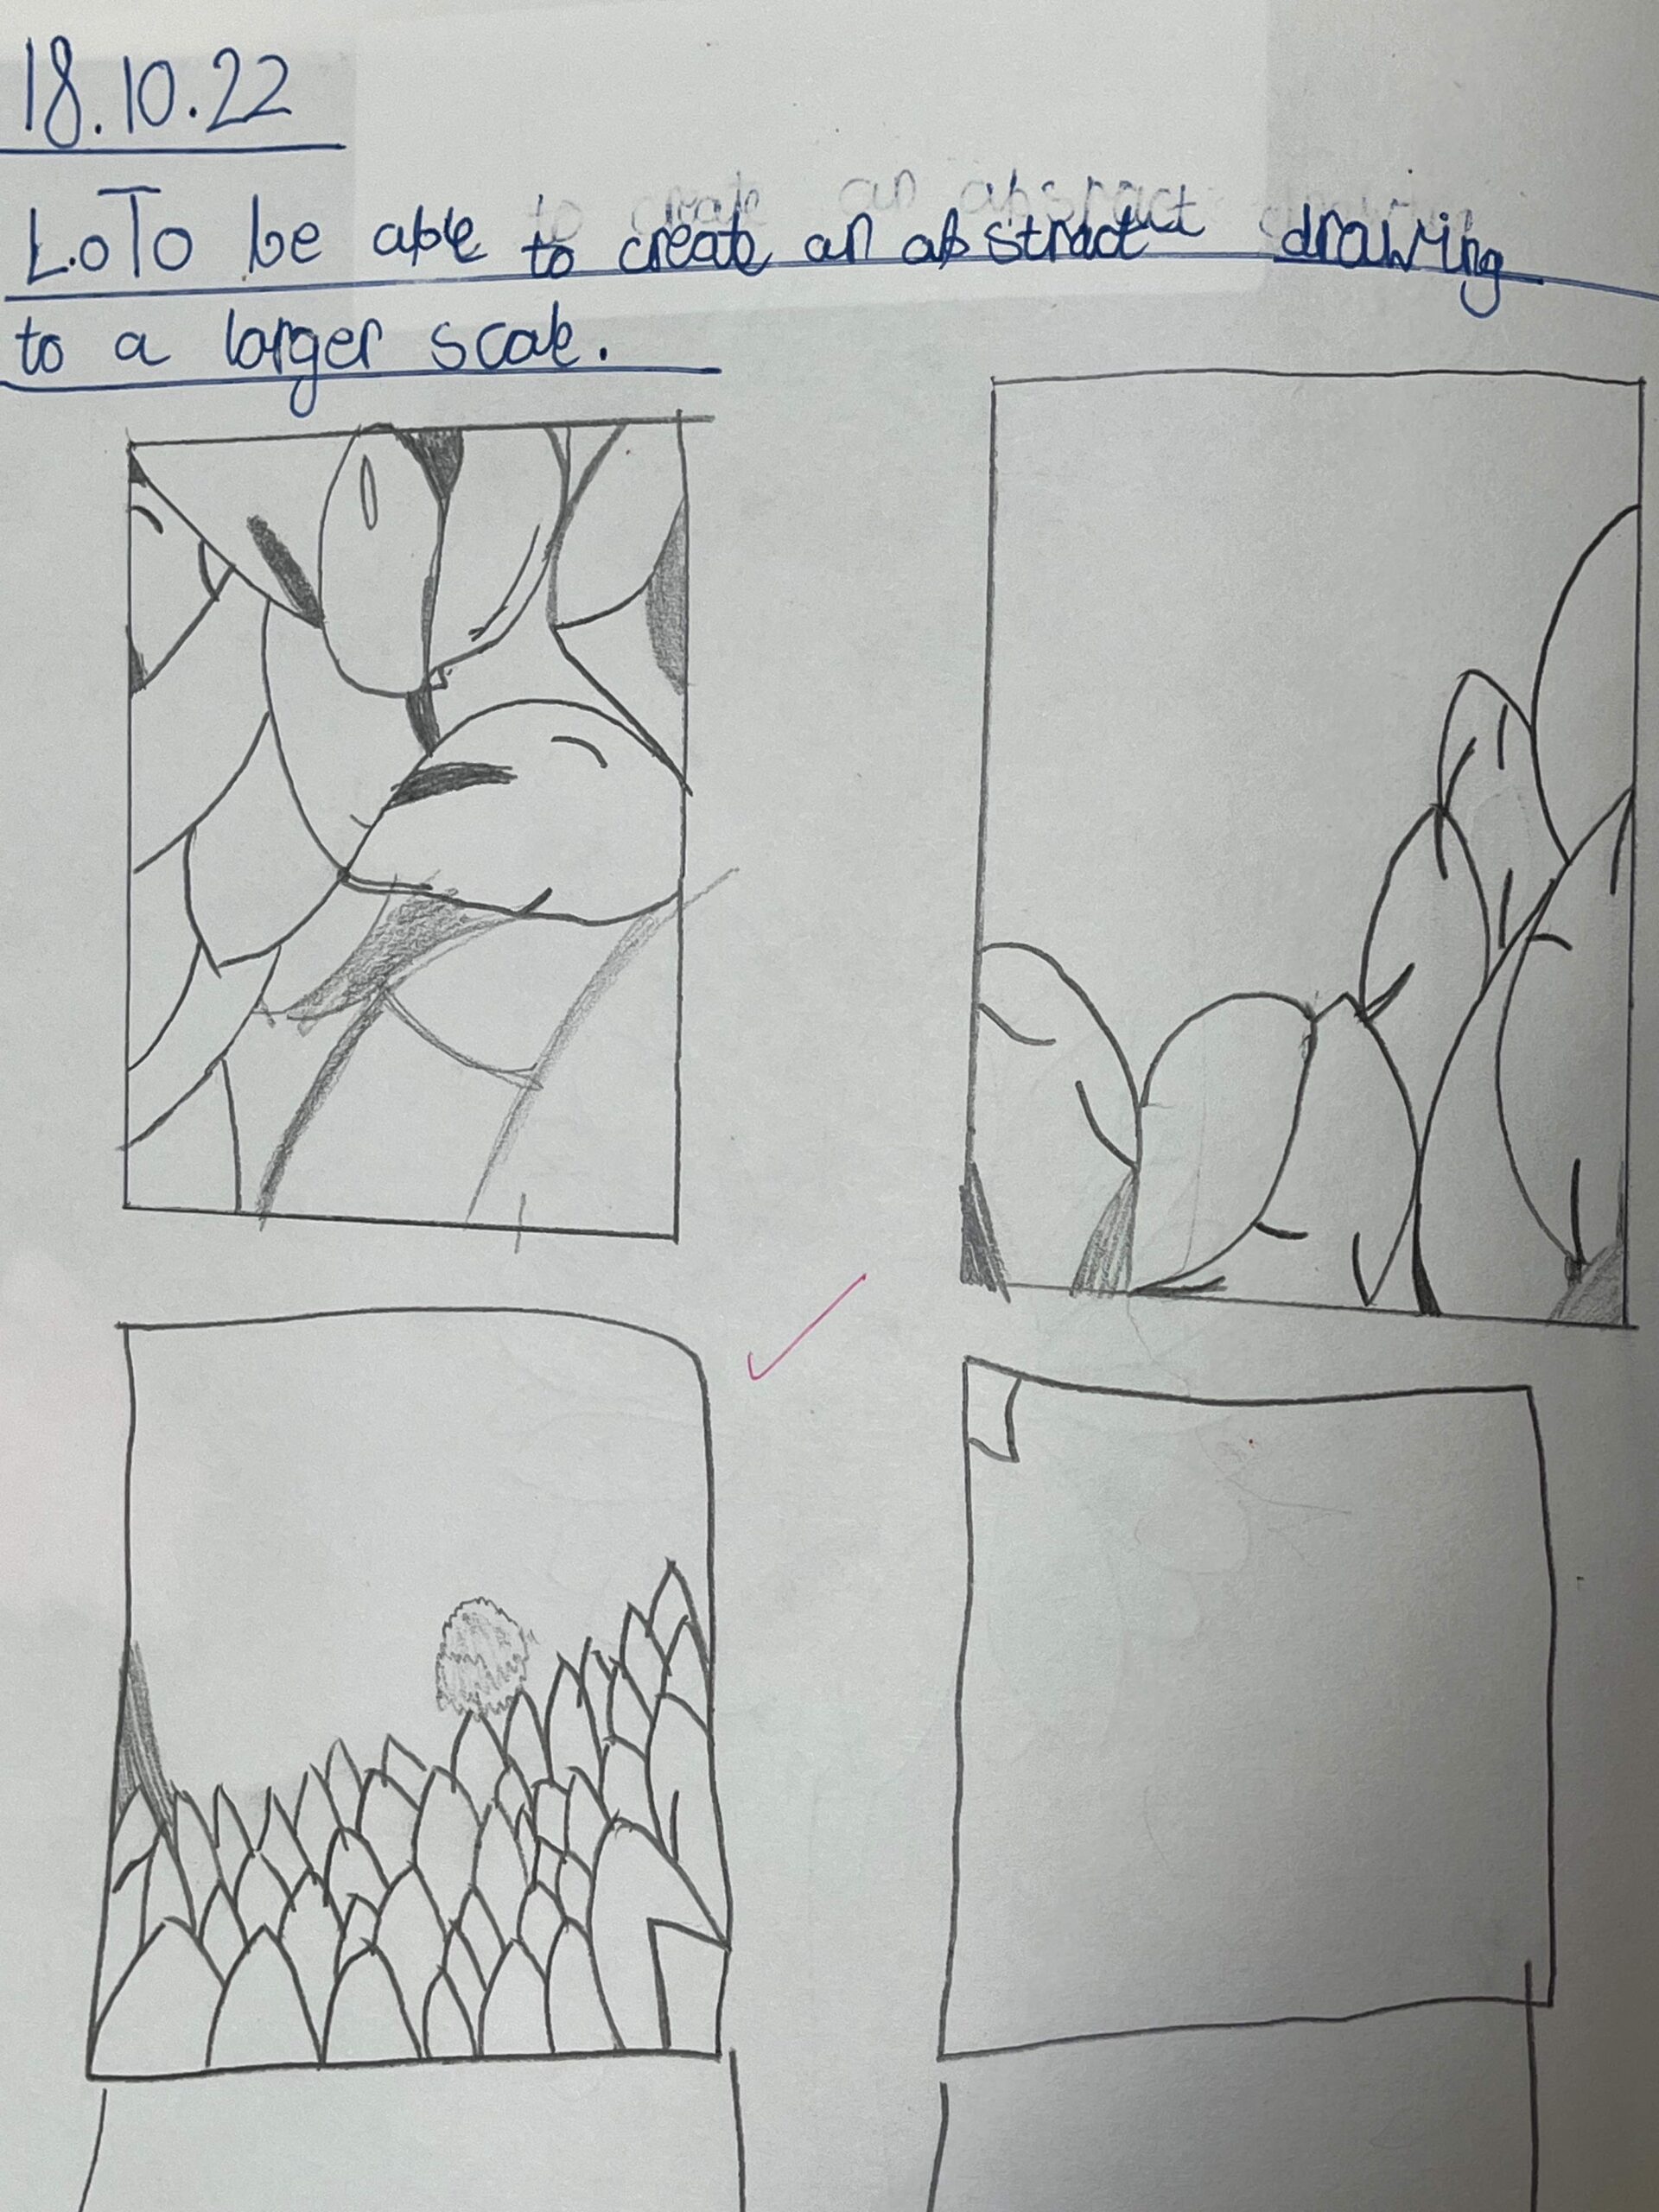 Year 3 thumbnail pencil sketches to explore composition for a larger piece.